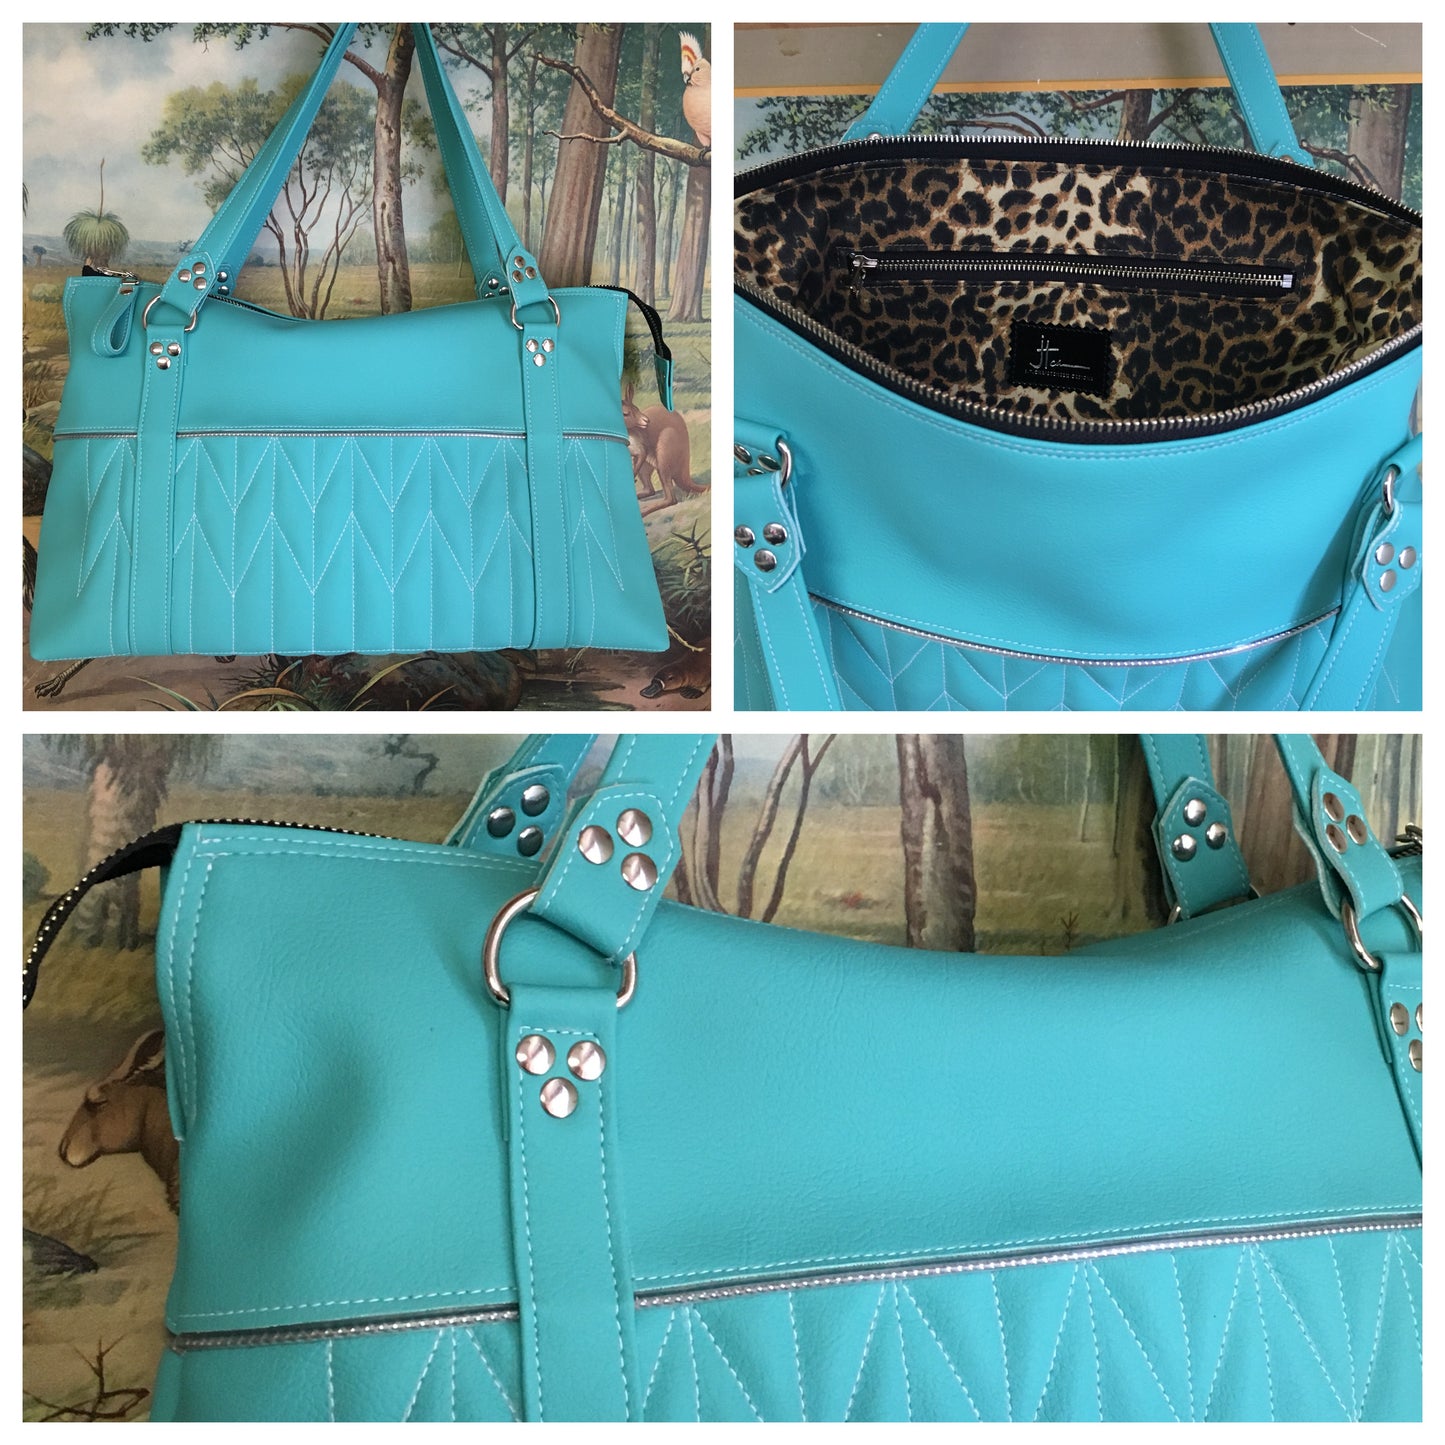 Zipper Tote Bag with Firebird Pleating - Turquoise Vinyl / Leopard Canvas Lining